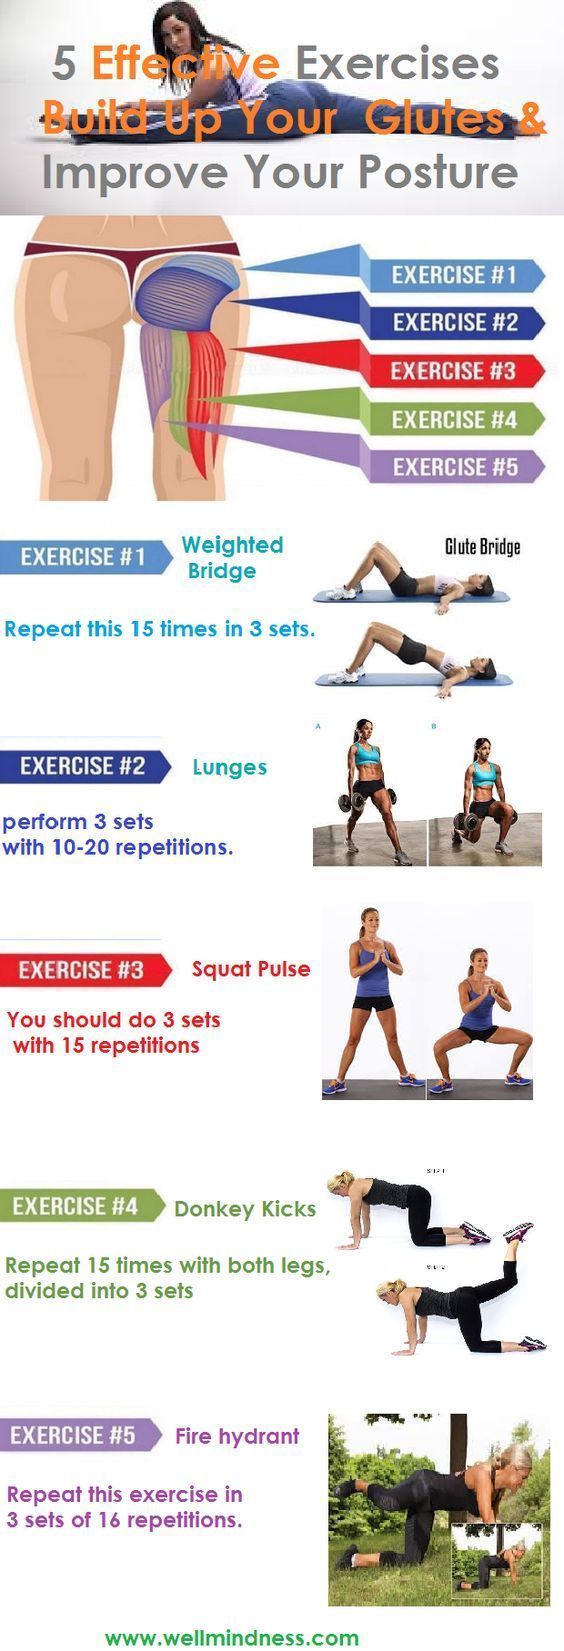 5 effective exercises to build your glutes and improve your posture